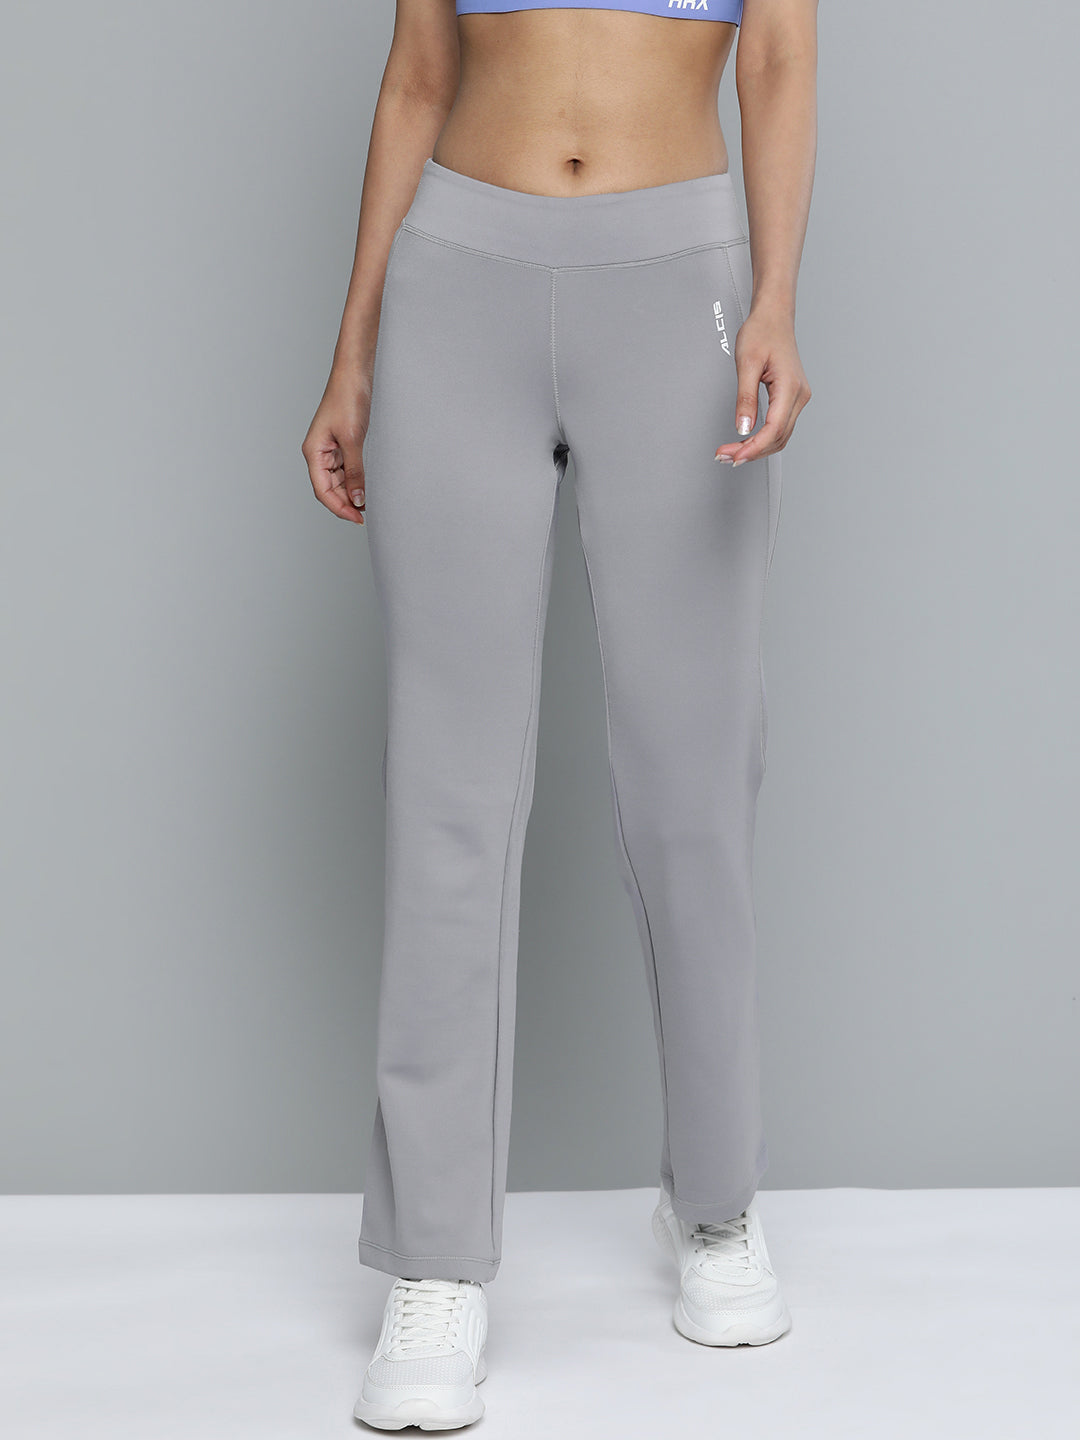 Campus Sutra Grey Striped Track Pants